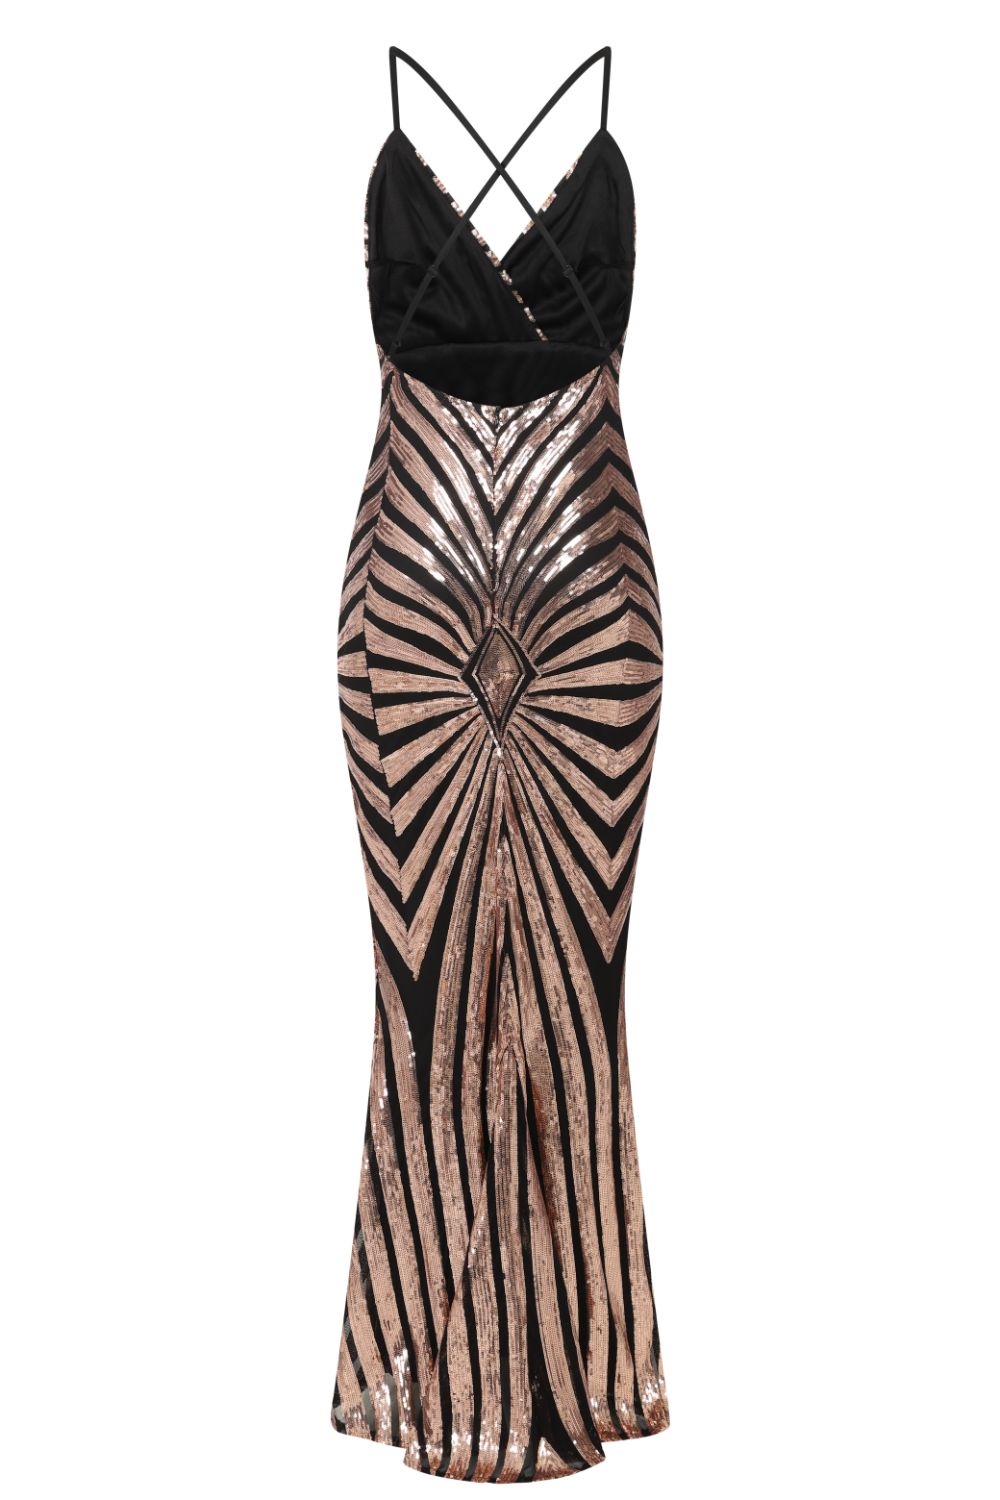 Timeless Black Gold Plunge Sequin Hourglass Illusion Mermaid Maxi Dress